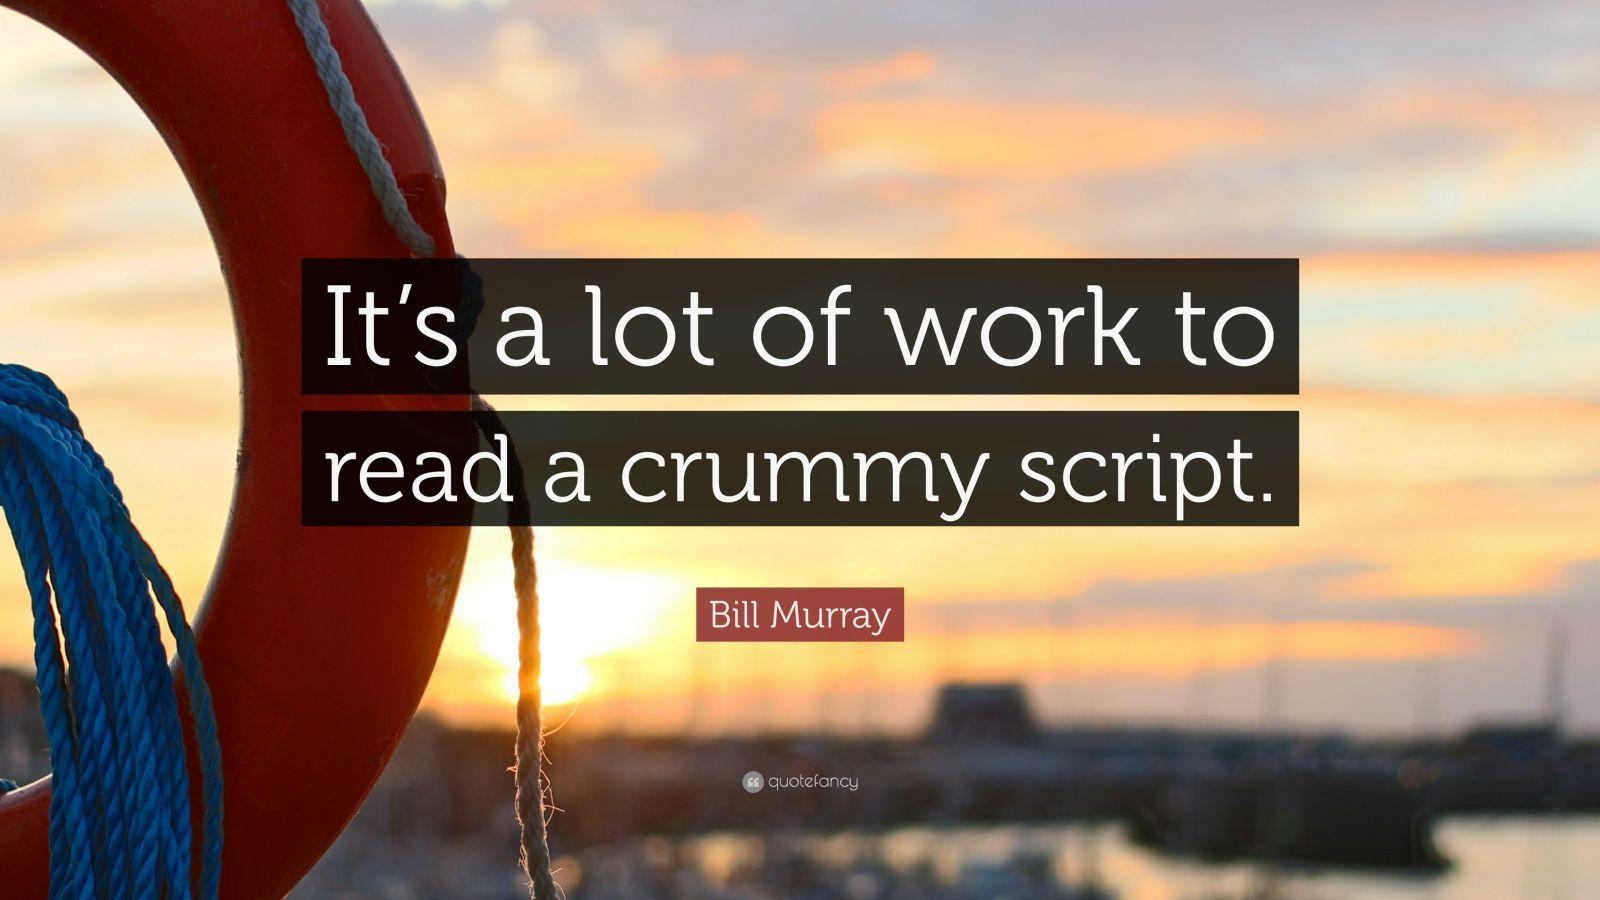 Bill Murray Quote: “It's a lot of work to read a crummy script